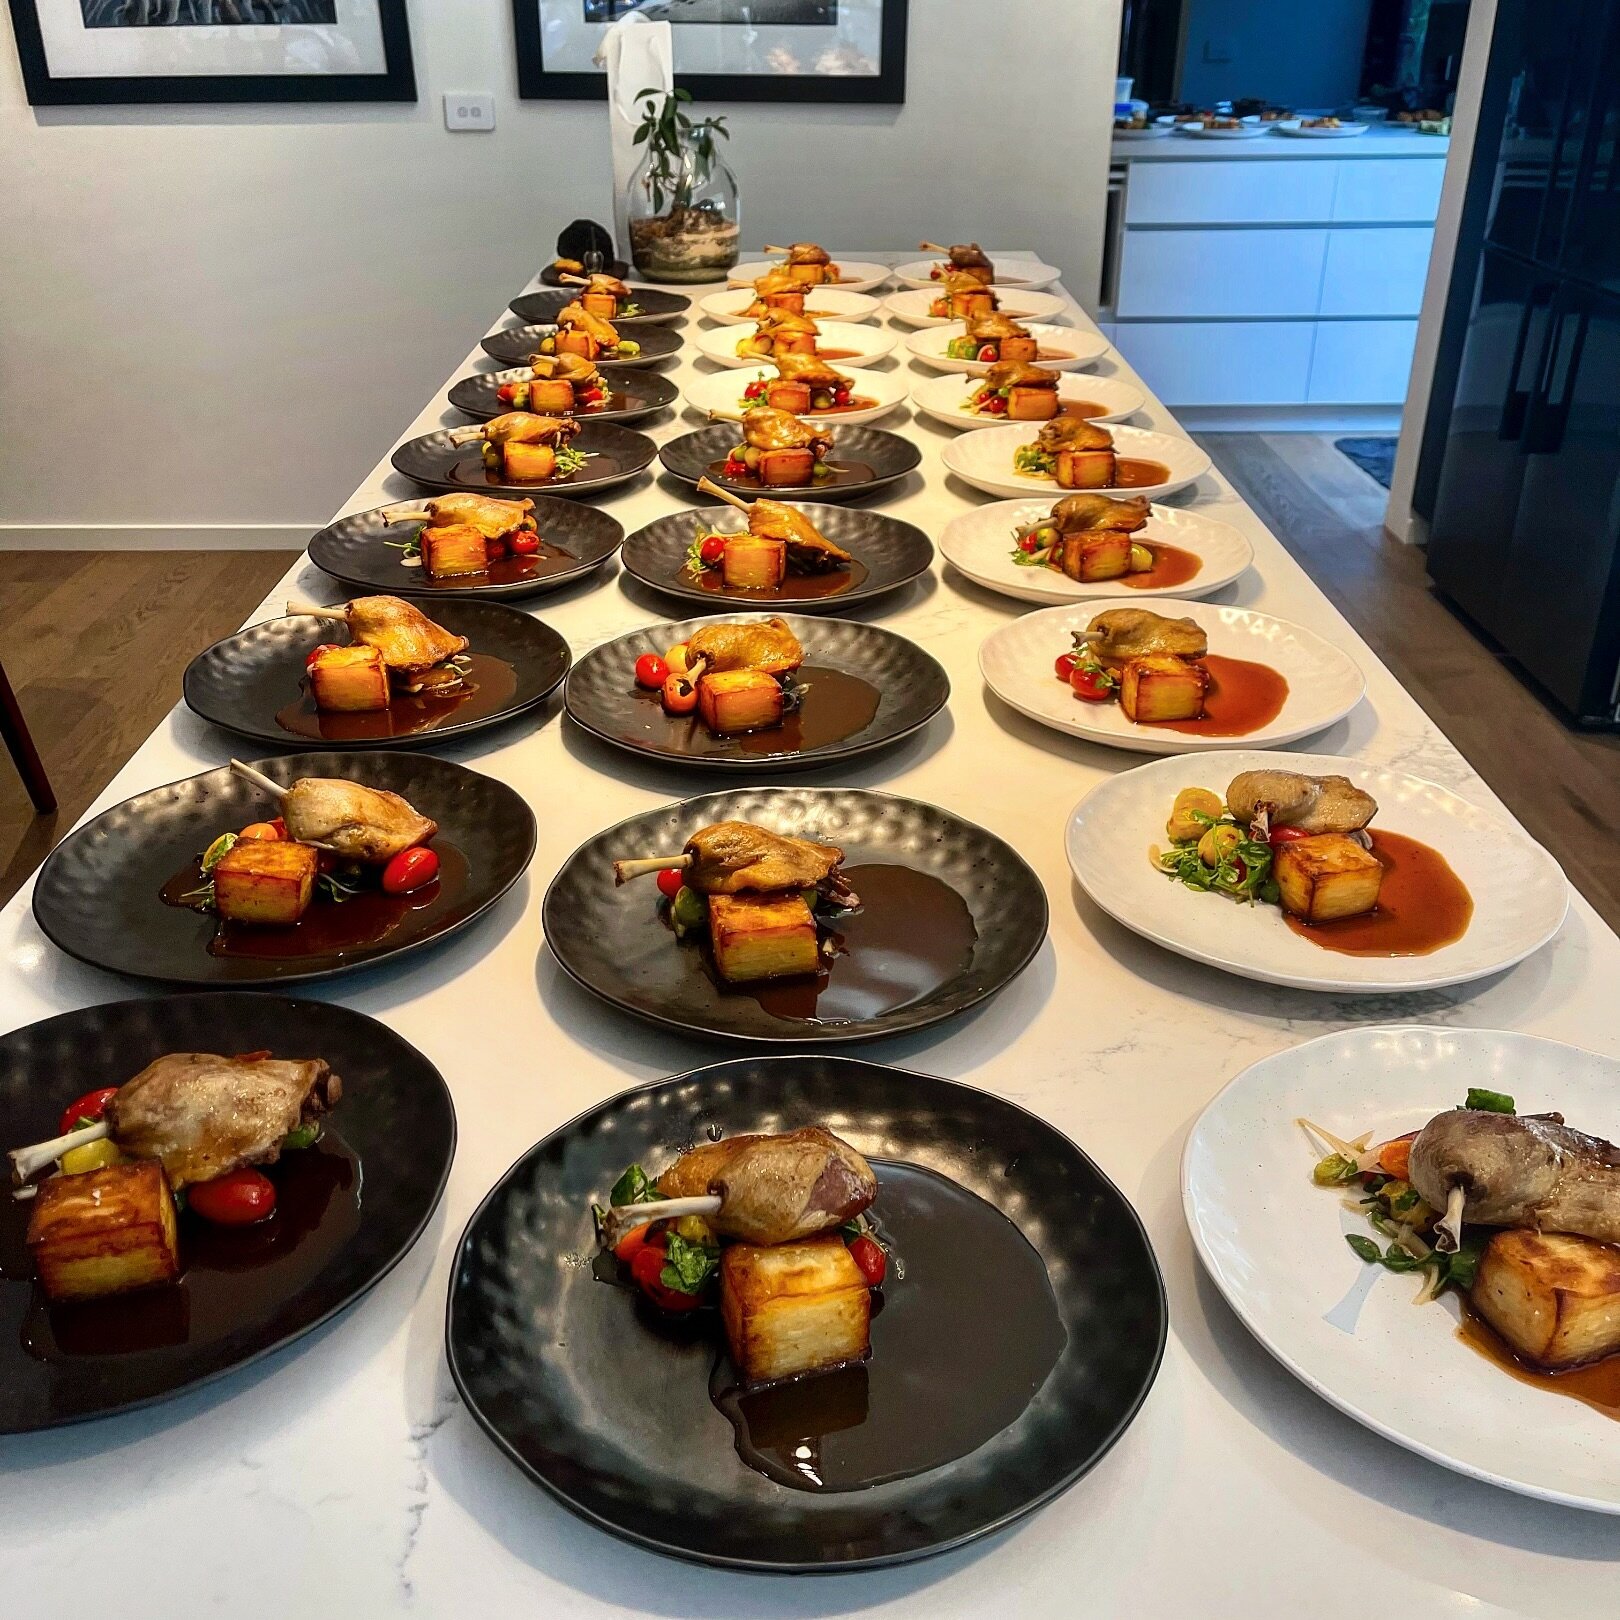 About last weekend! Had a lot of fun serving 30 plates of food to my guests. Everything went well and glad the feedback was positive! #mapasion #foodartlove #privatechef #melbournefoodie #31plates #service #melbournedining #privatedinner #foodporn